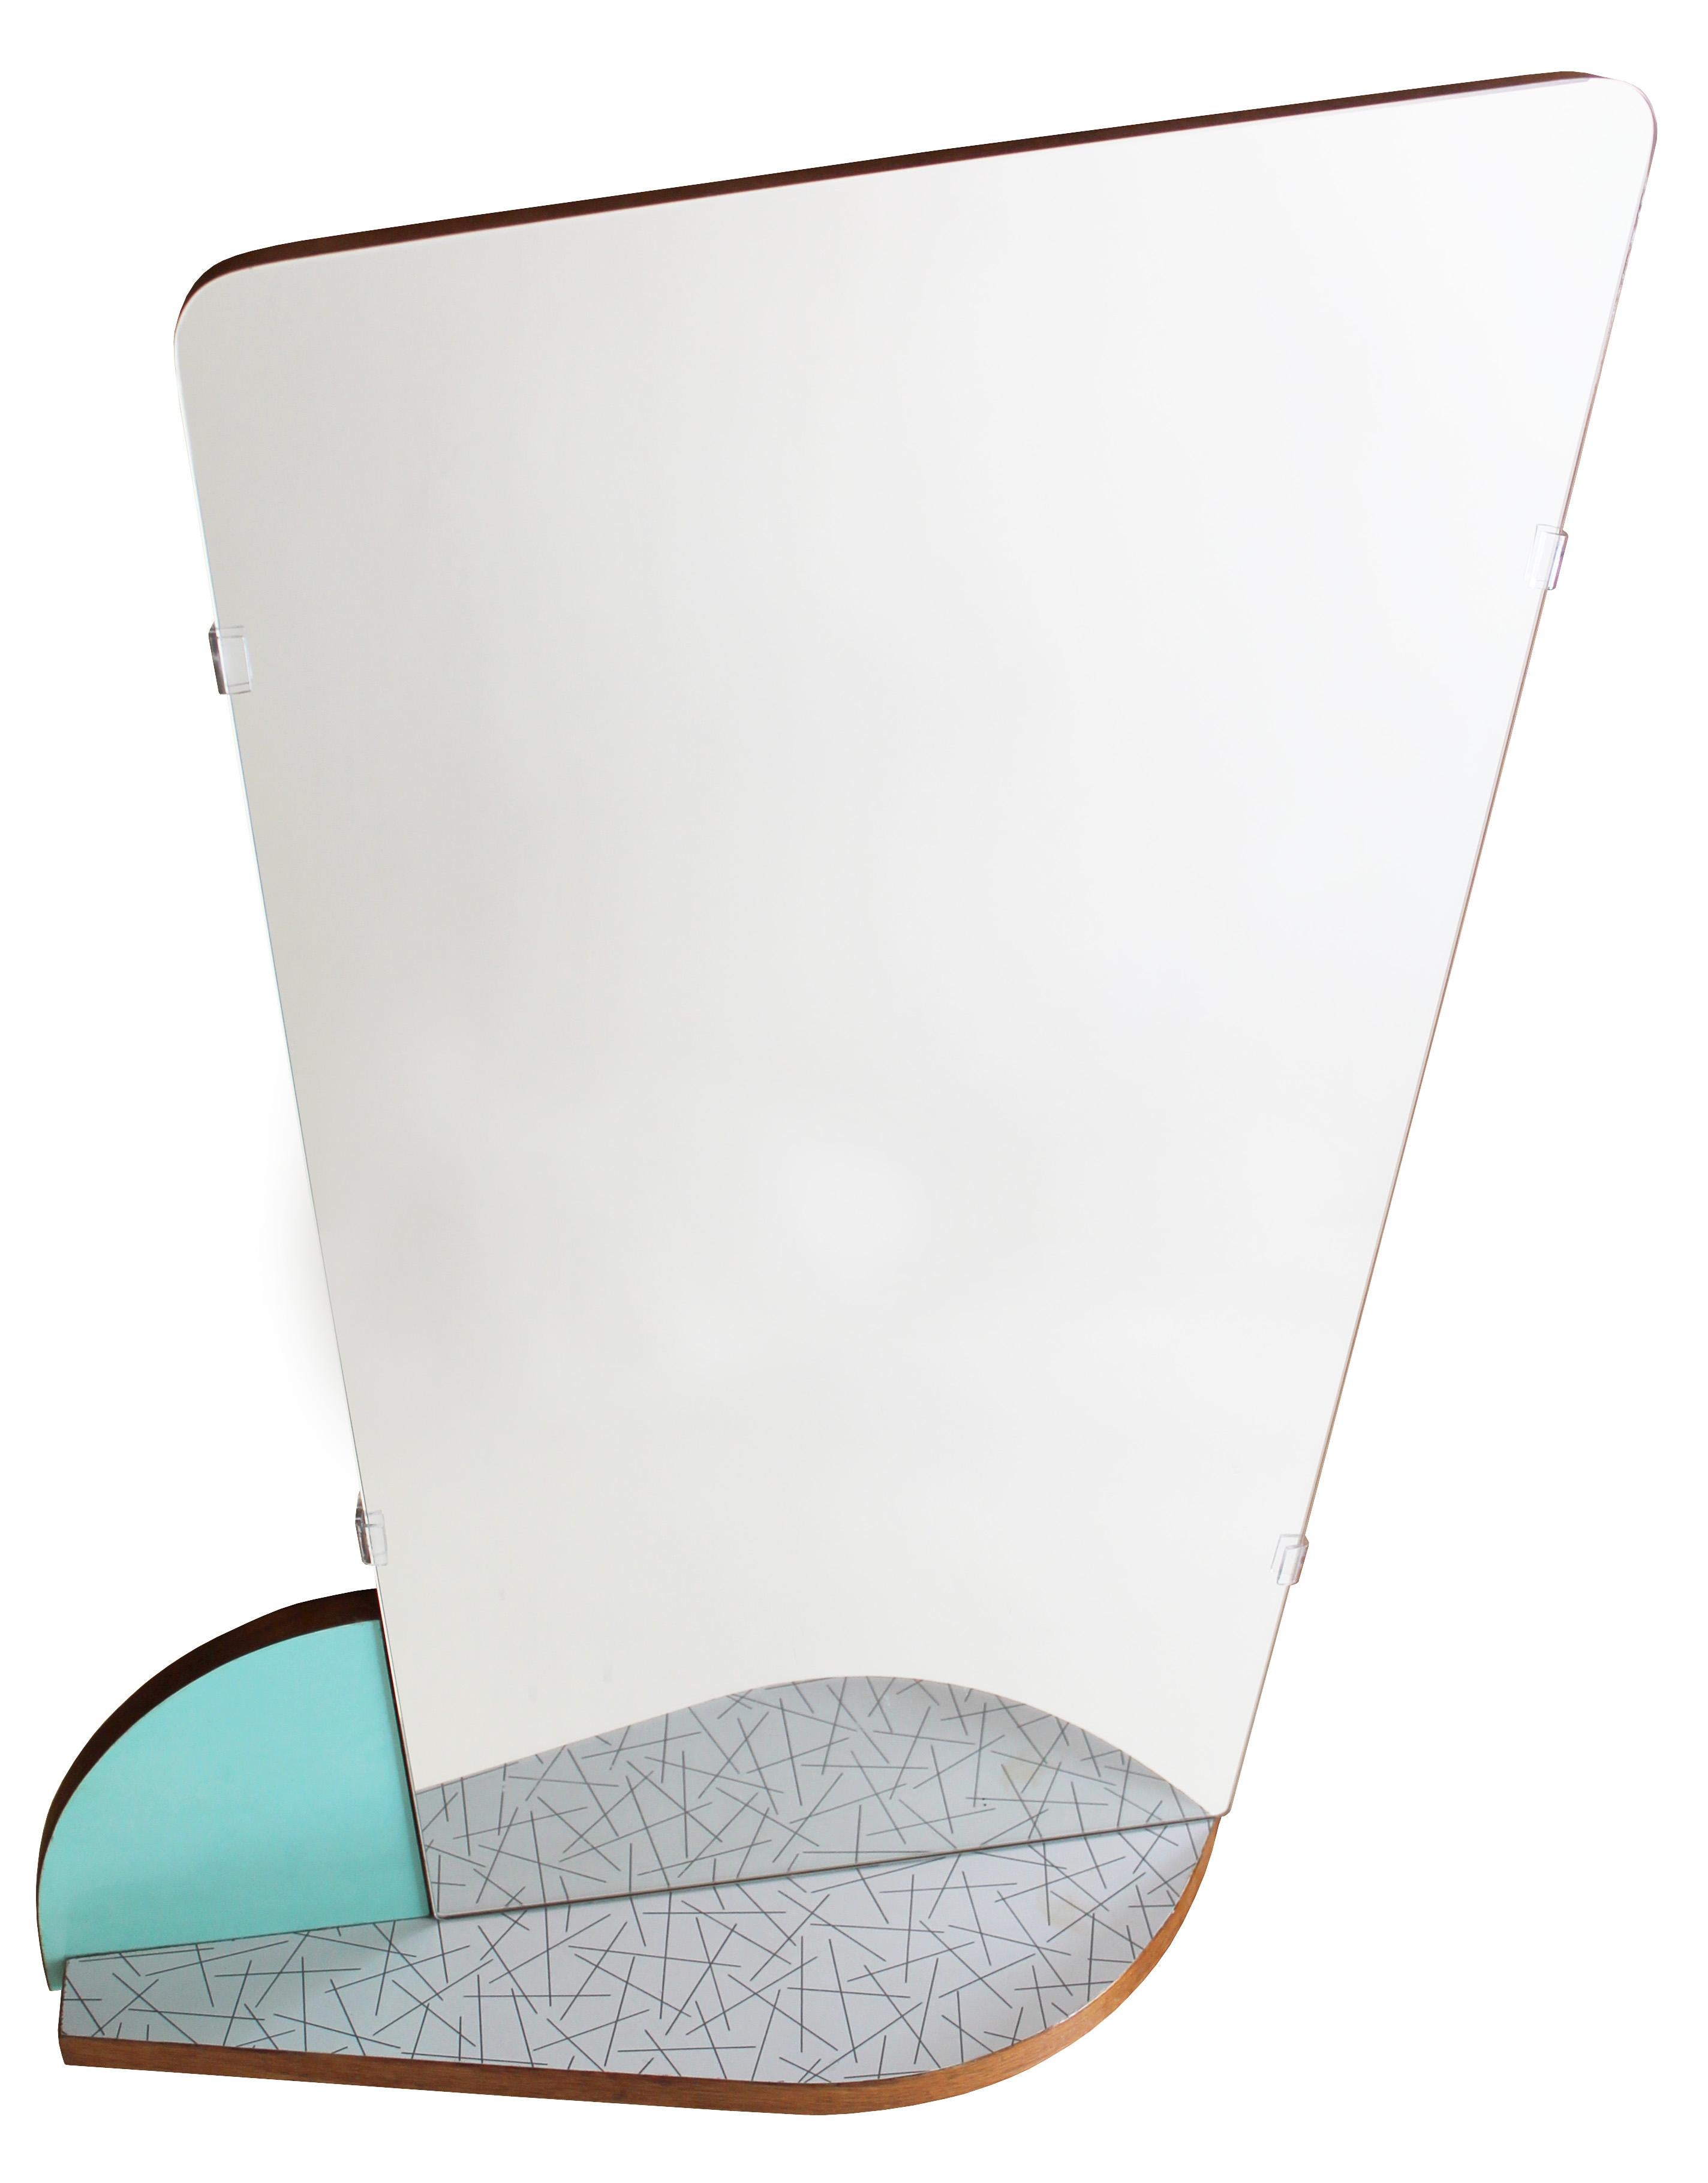 This unique Czech midcentury mirror is a composition of shapes made up of a patterned formica shelf, a turquoise segment and an asymmetric mirror. 

This mirror perfectly embodies the elegance of the so-called Brussels Style, named after Expo 1958